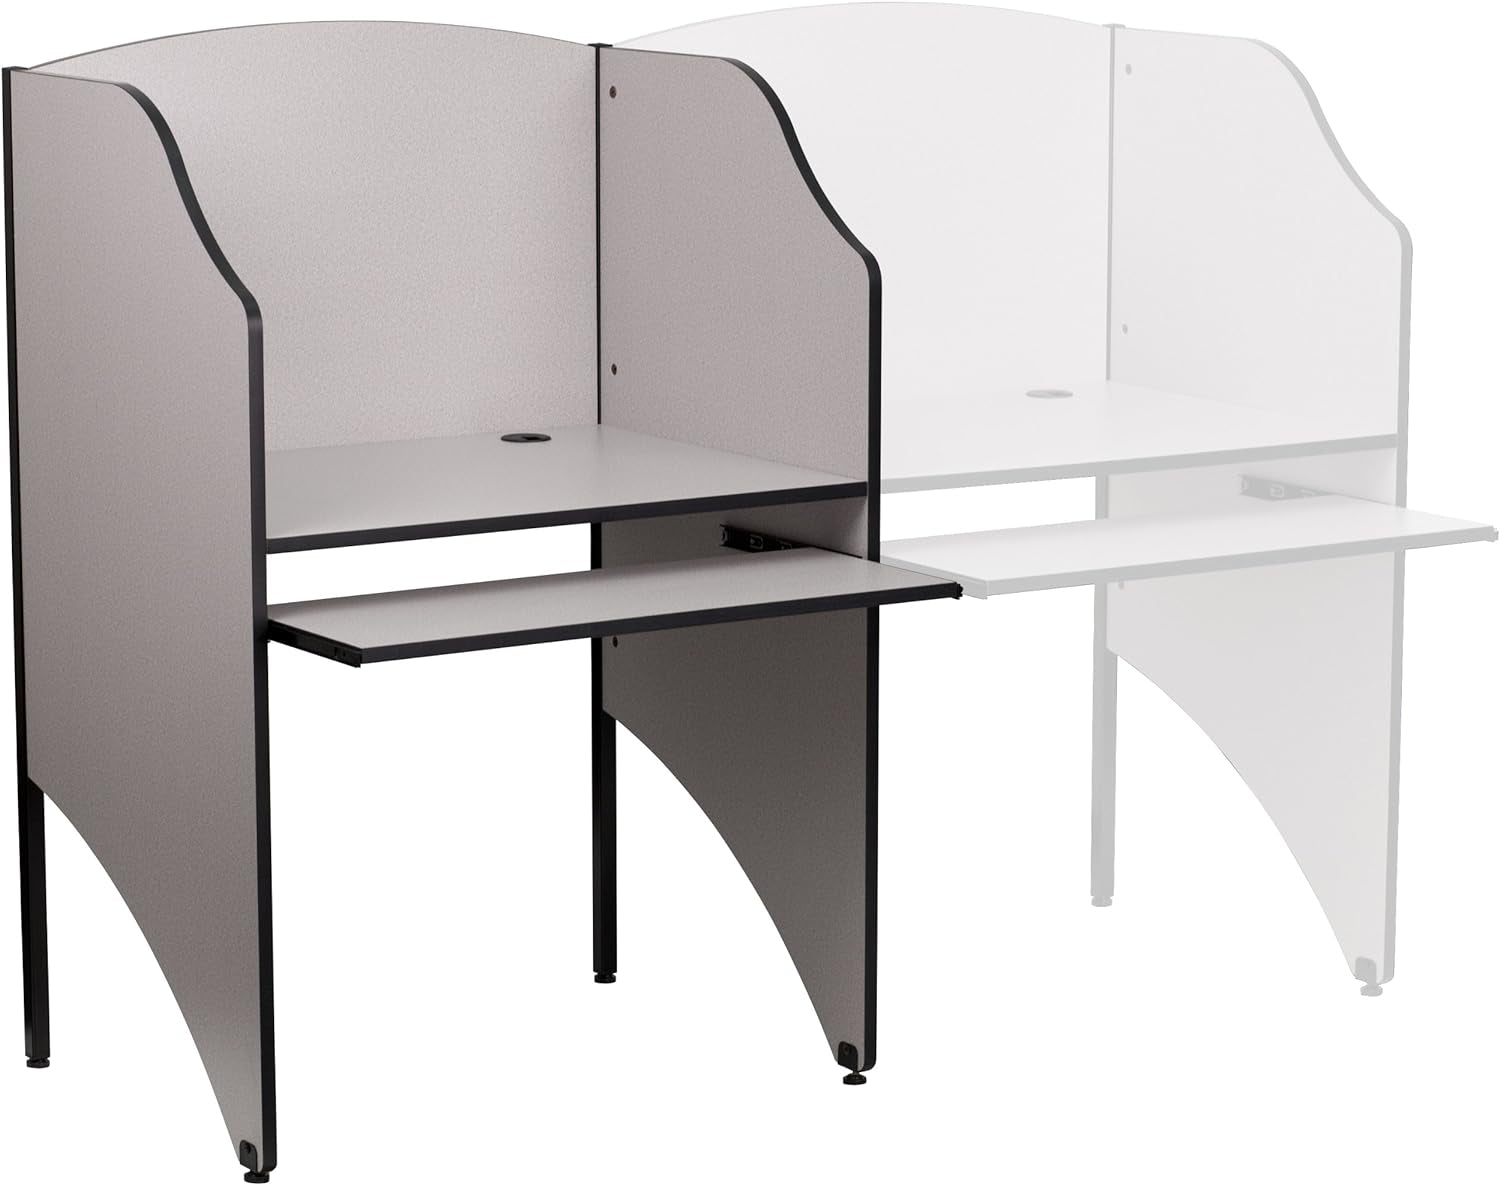 Kevin Starter Study Carrel with Thermal Fused Surface and Panels and Wire Management Grommets in Nebula Grey Finish